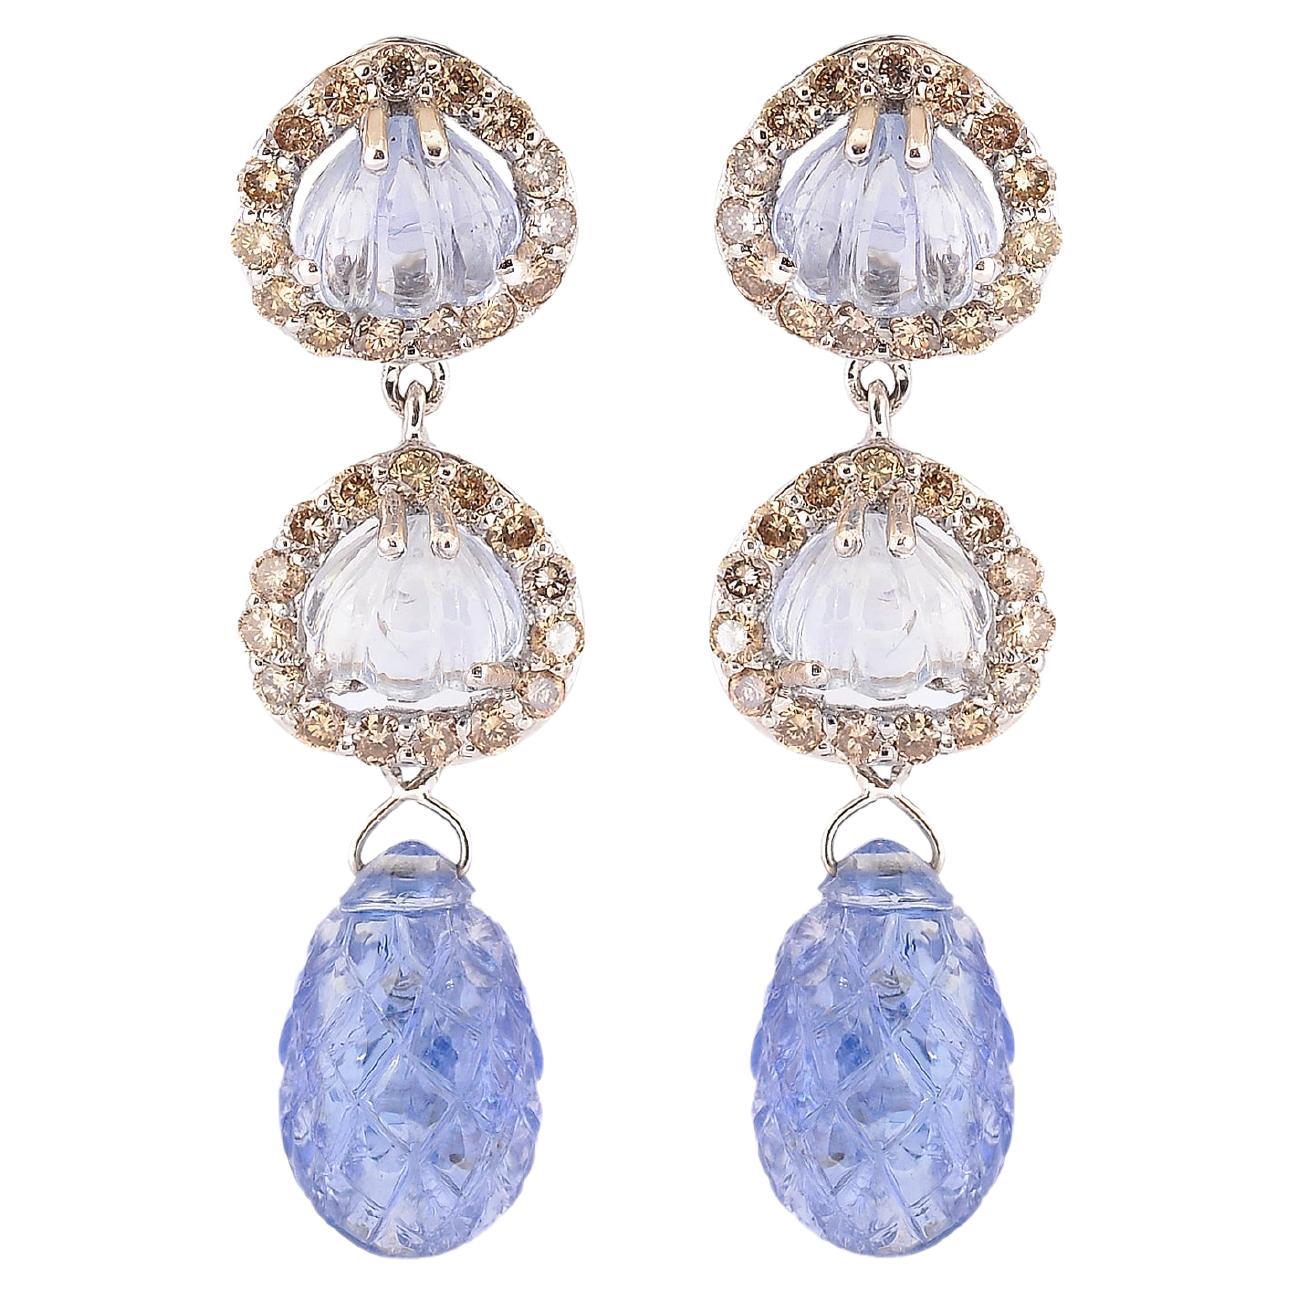 Exquisite 16.49 Carats Natural Carved Sapphire Dangling Earring Pair